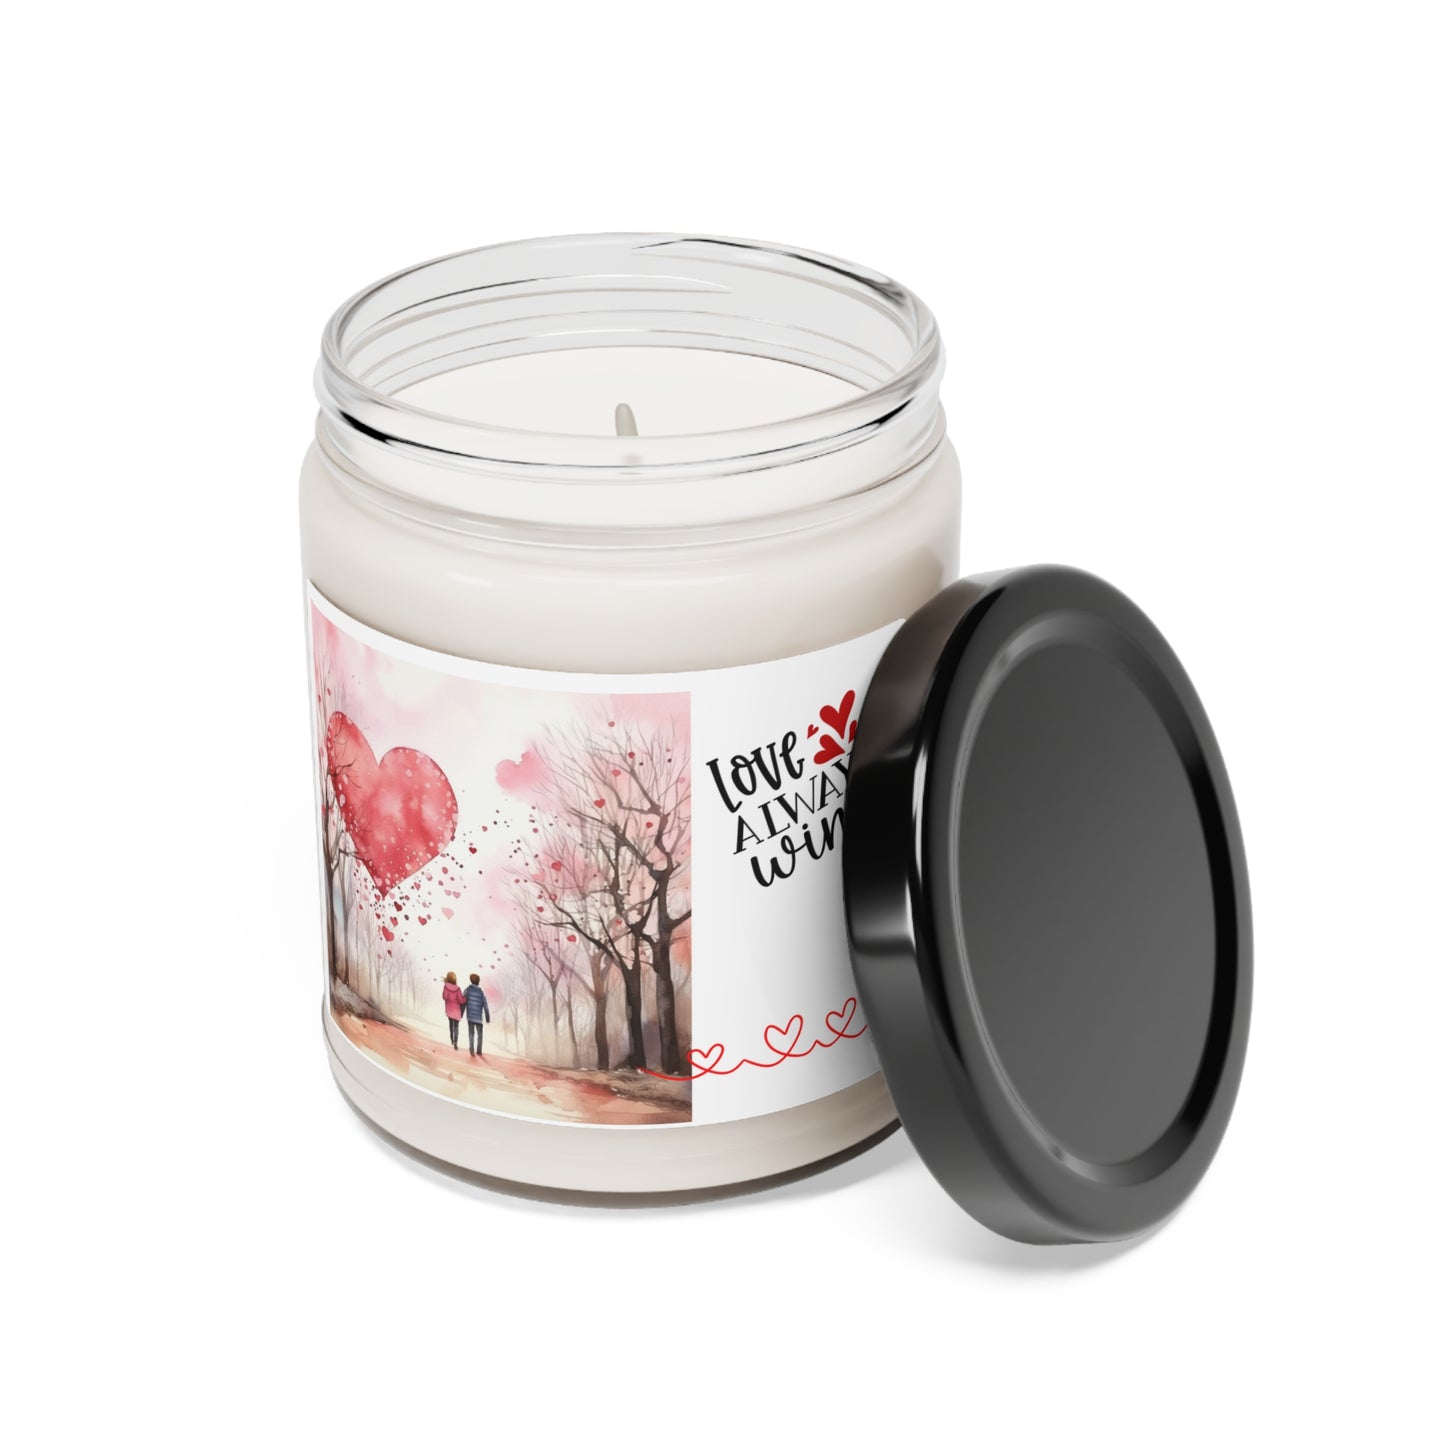 Love Candle Scented Soy Candle, 9oz